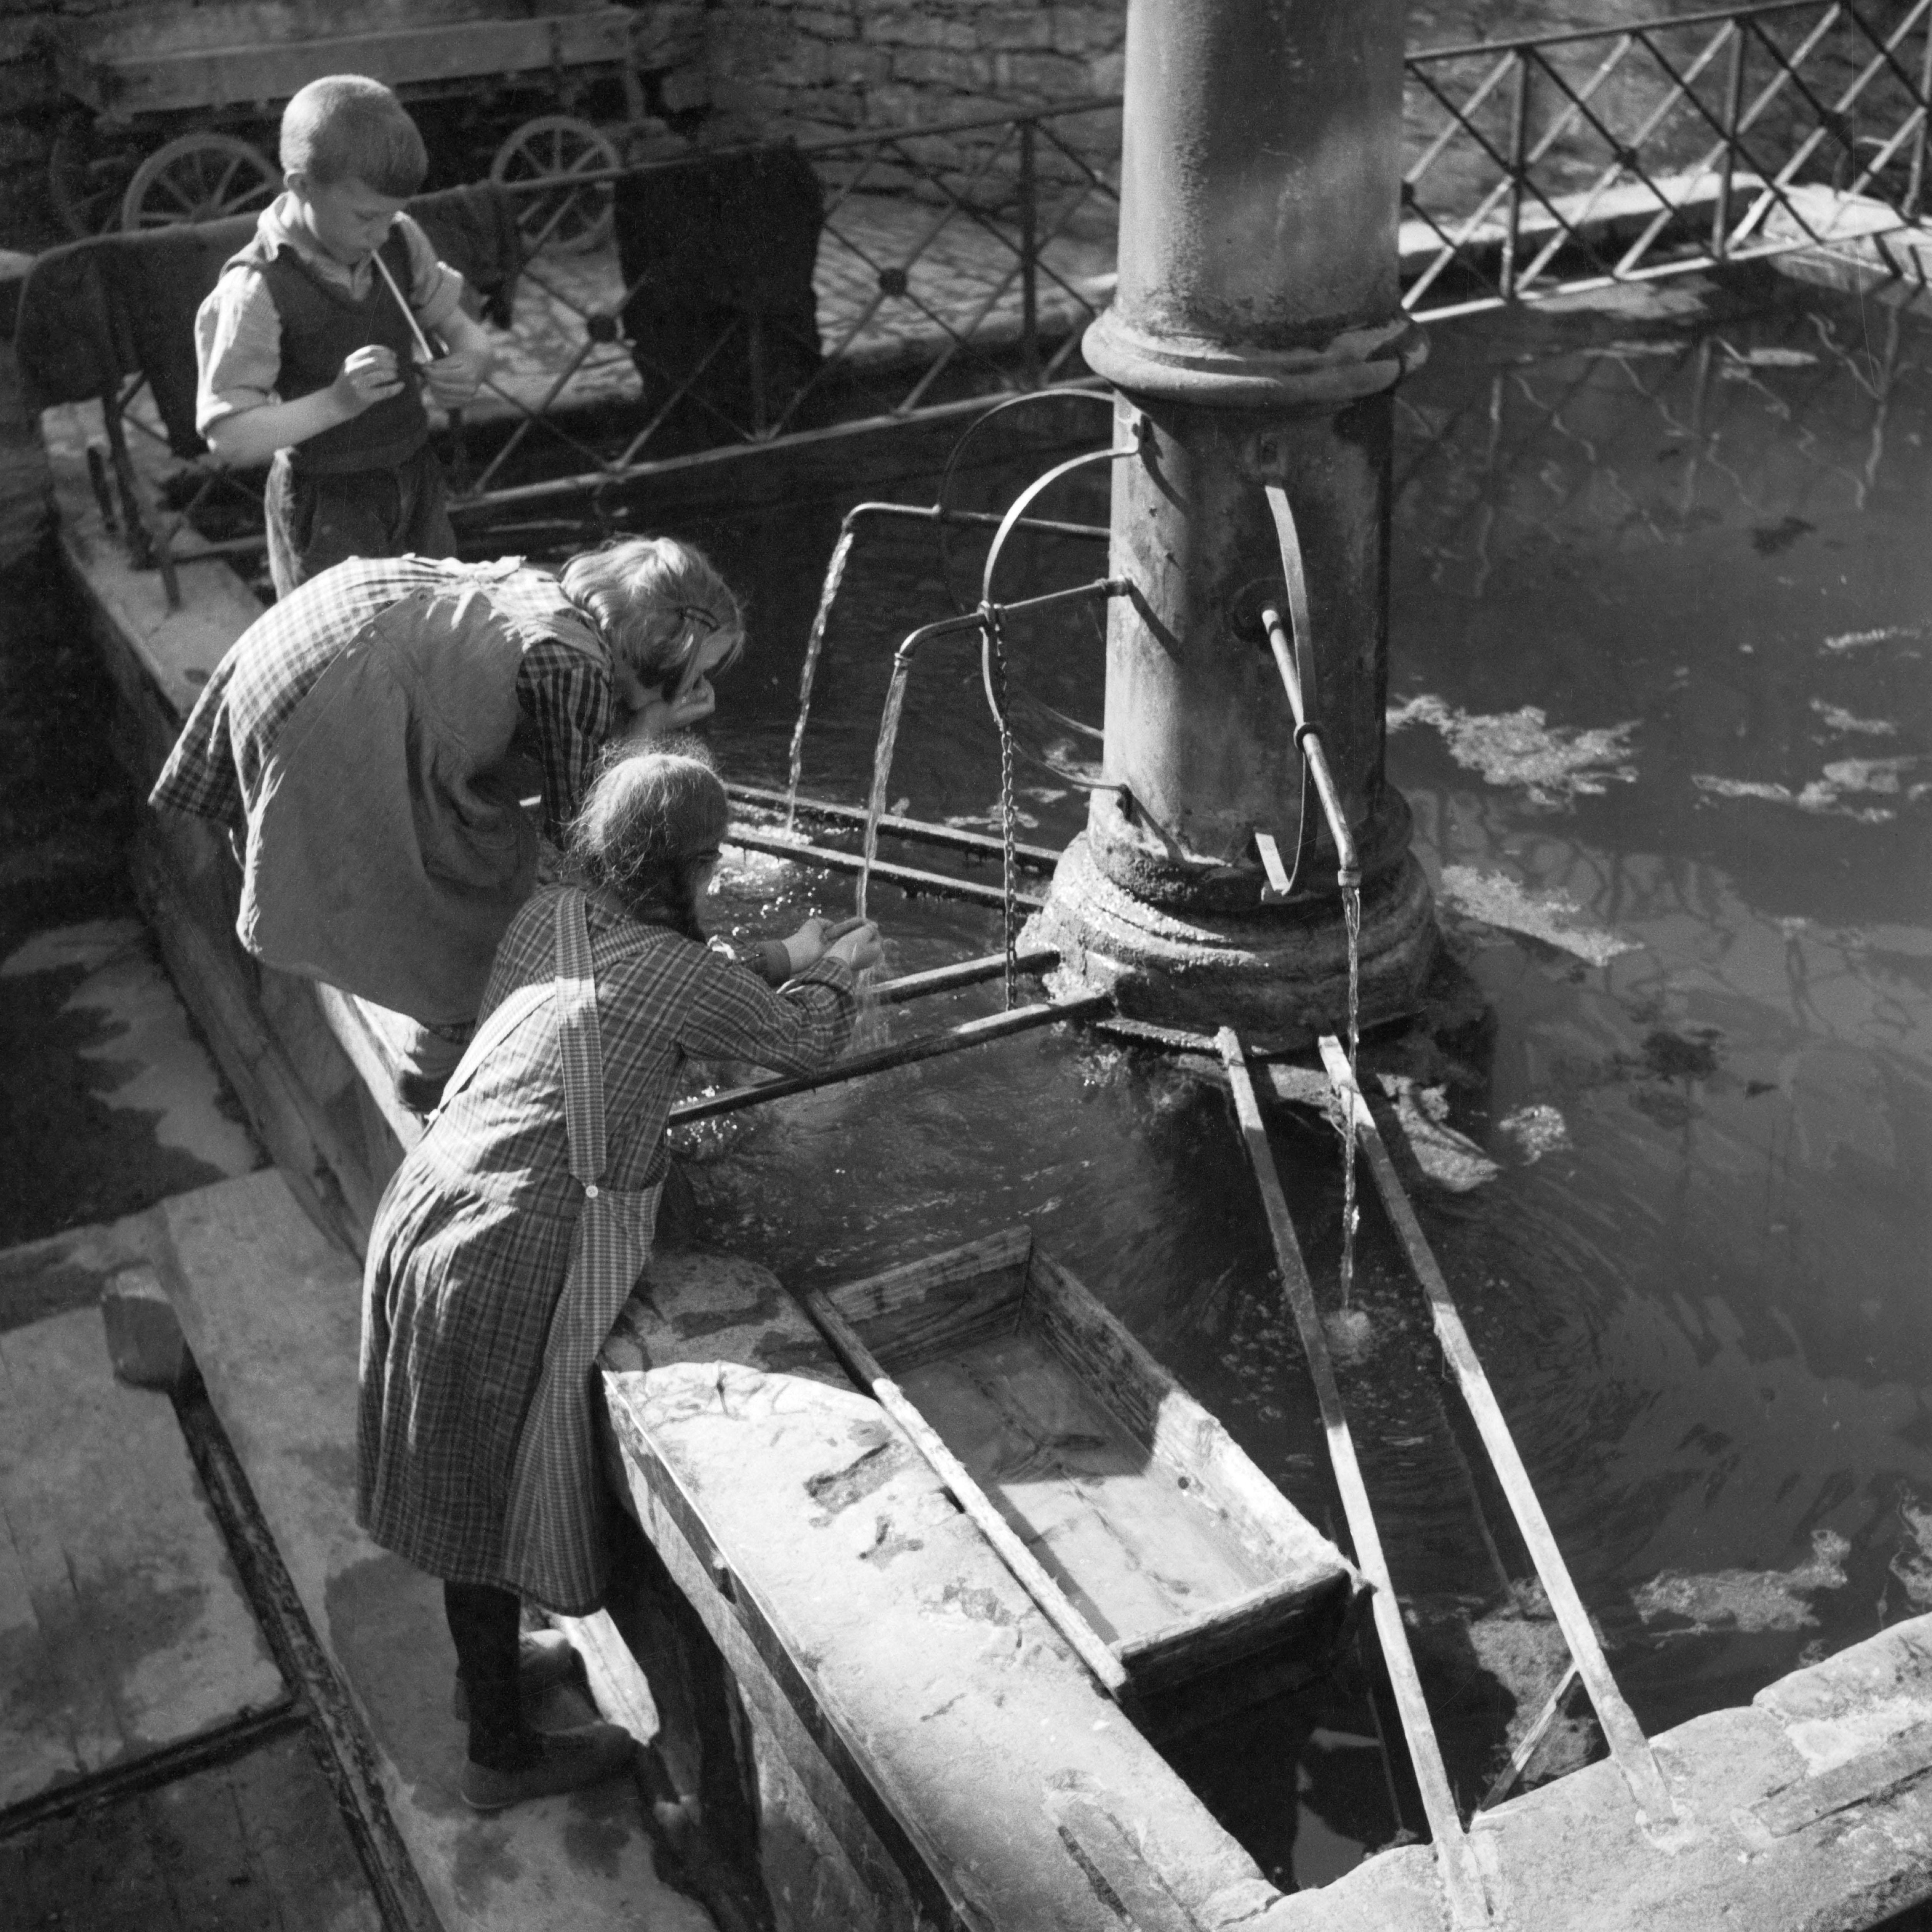 Karl Heinrich Lämmel Black and White Photograph - Children drinking water from fountain Heidelberg, Germany 1936, Printed Later 